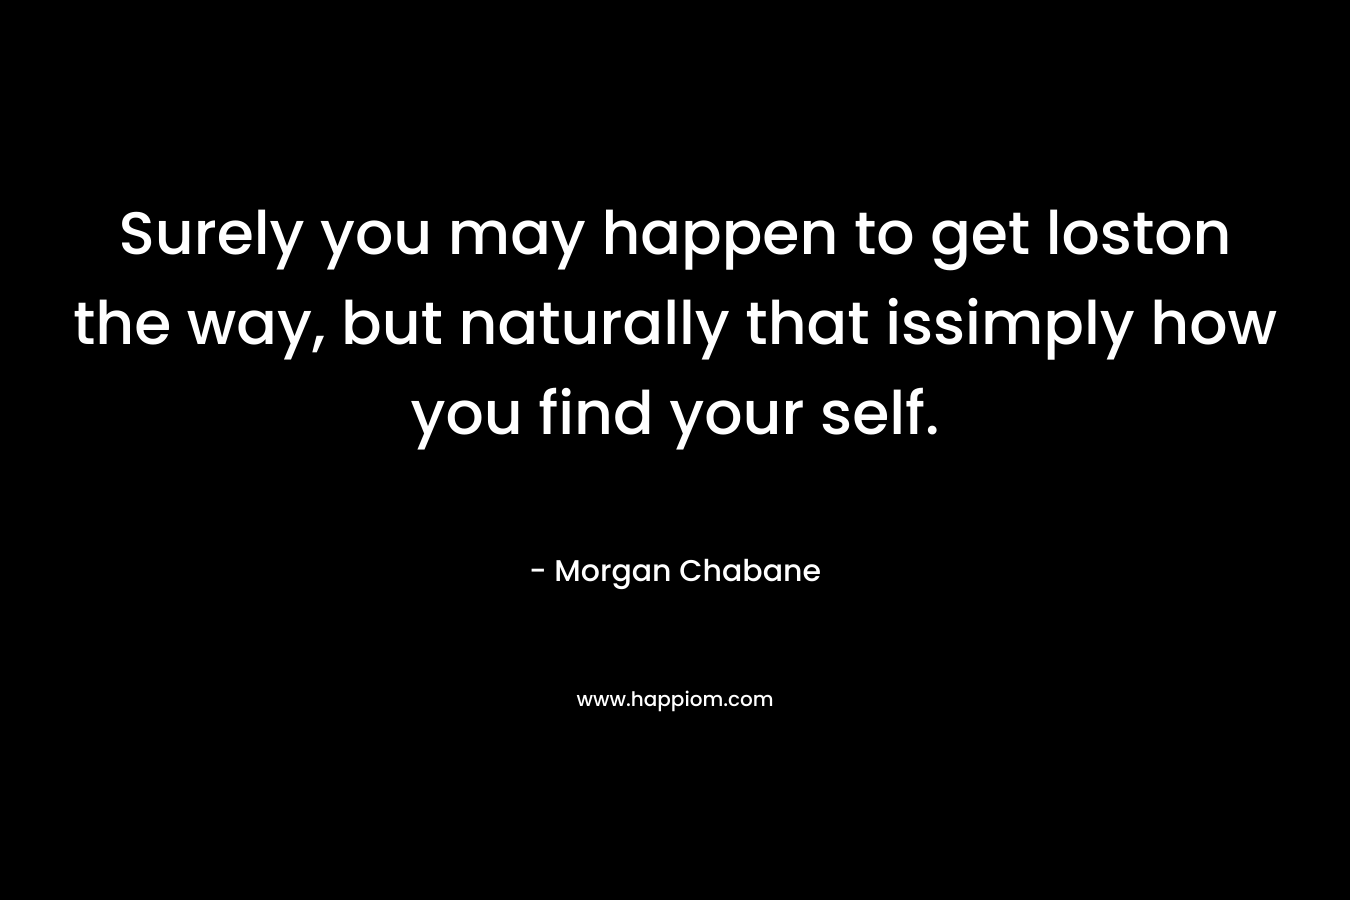 Surely you may happen to get loston the way, but naturally that issimply how you find your self. – Morgan Chabane